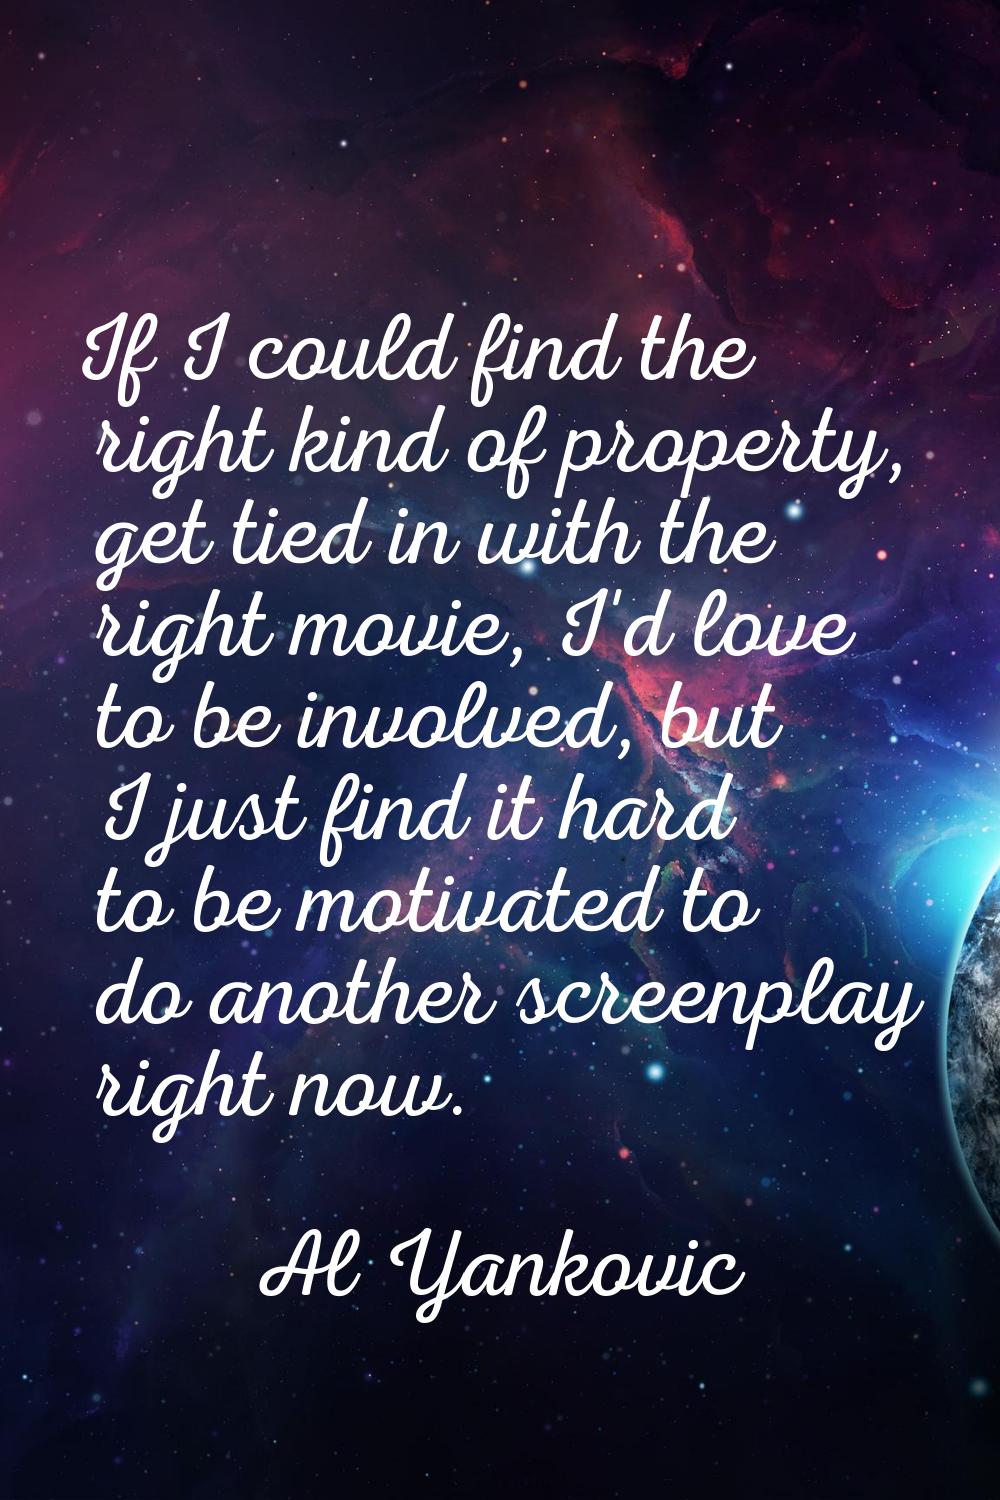 If I could find the right kind of property, get tied in with the right movie, I'd love to be involv